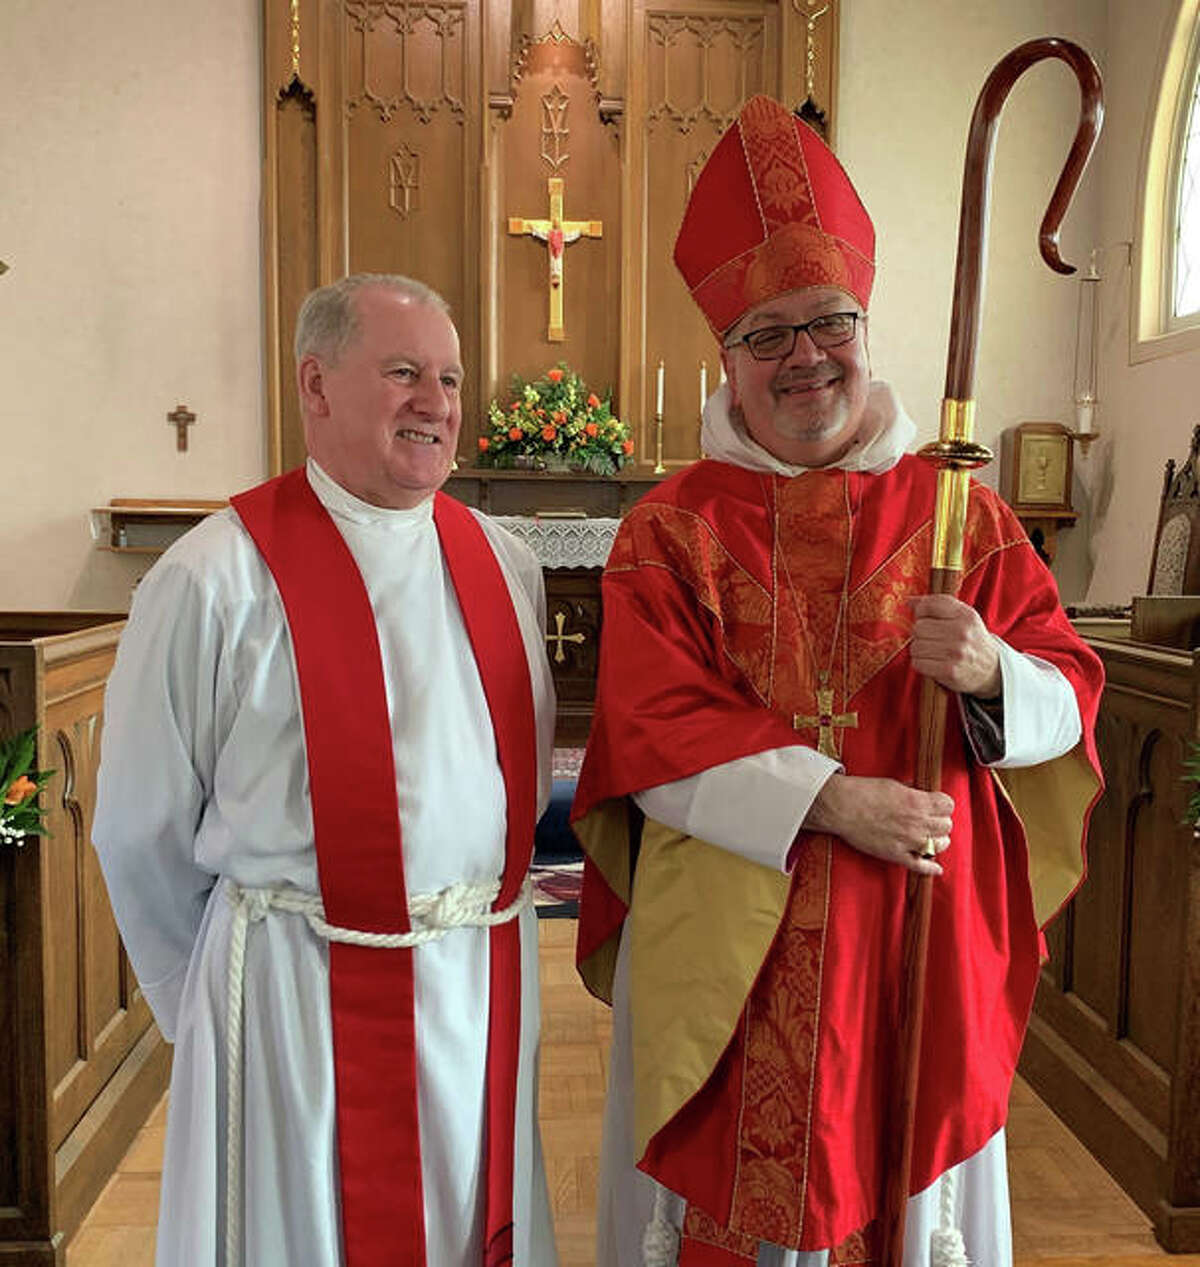 Fr. Joel Morsch, left, and Bishop Daniel Martins of the Springfield Archdiocese, right.